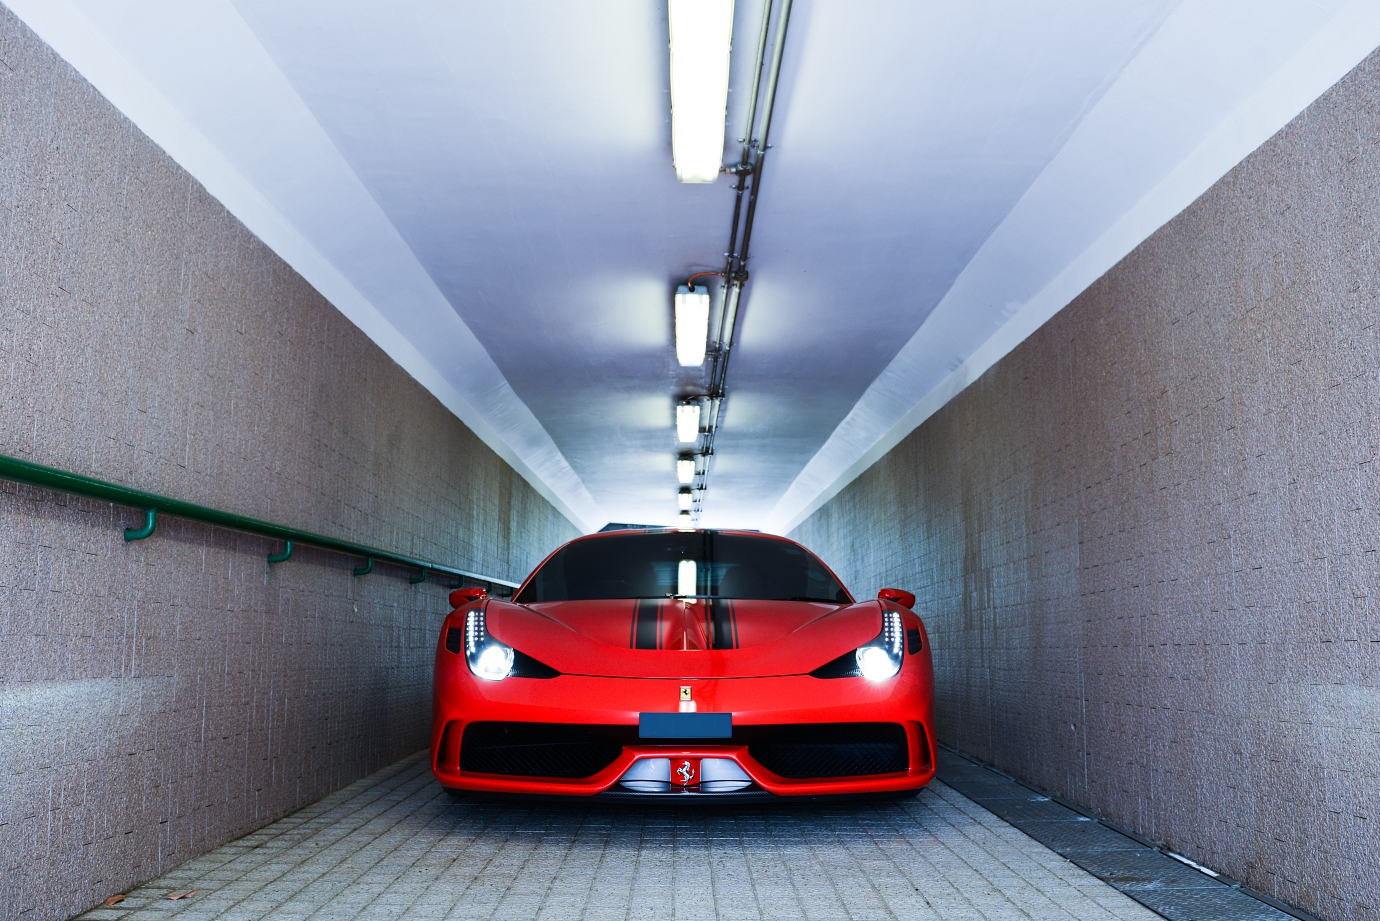 Ferrari 458 Speciale couldn't join our group shoot in time...